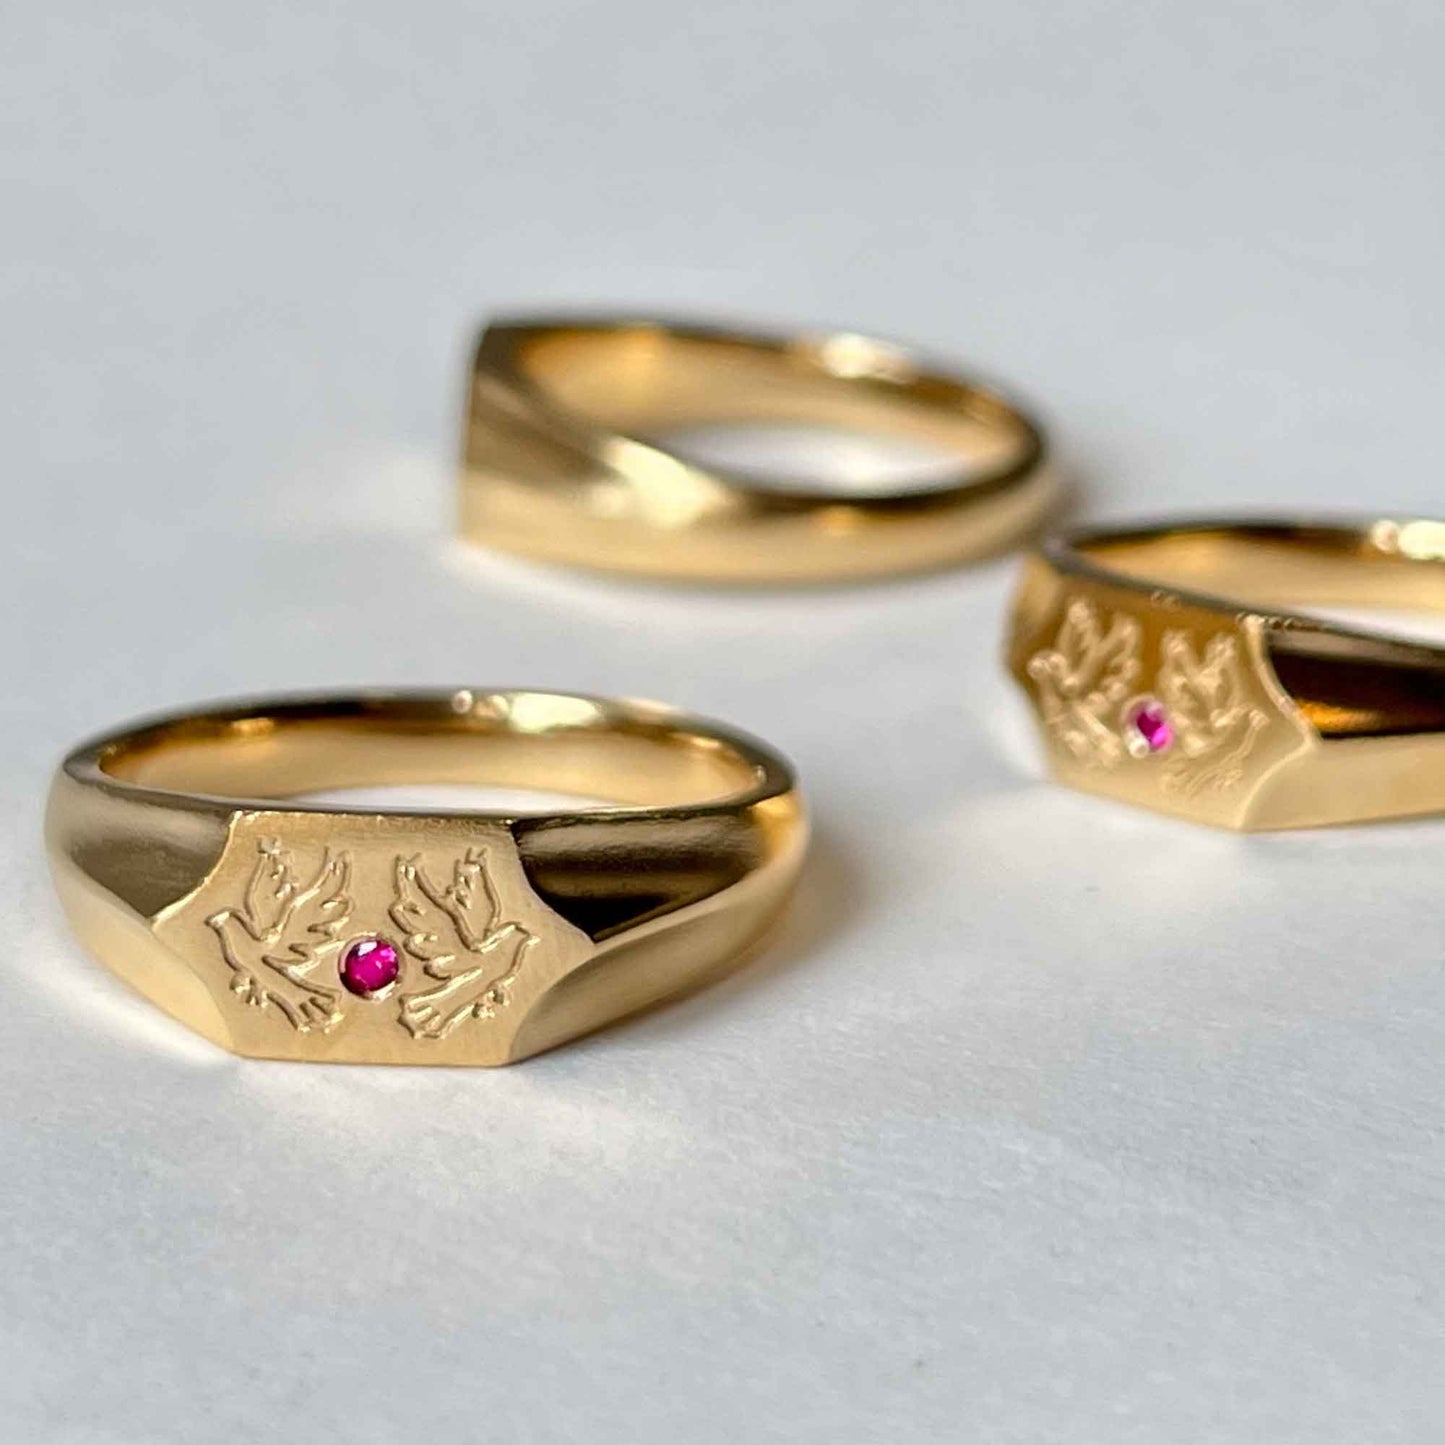 Two birds and a ruby stone on a 22CT gold vermeil signet ring